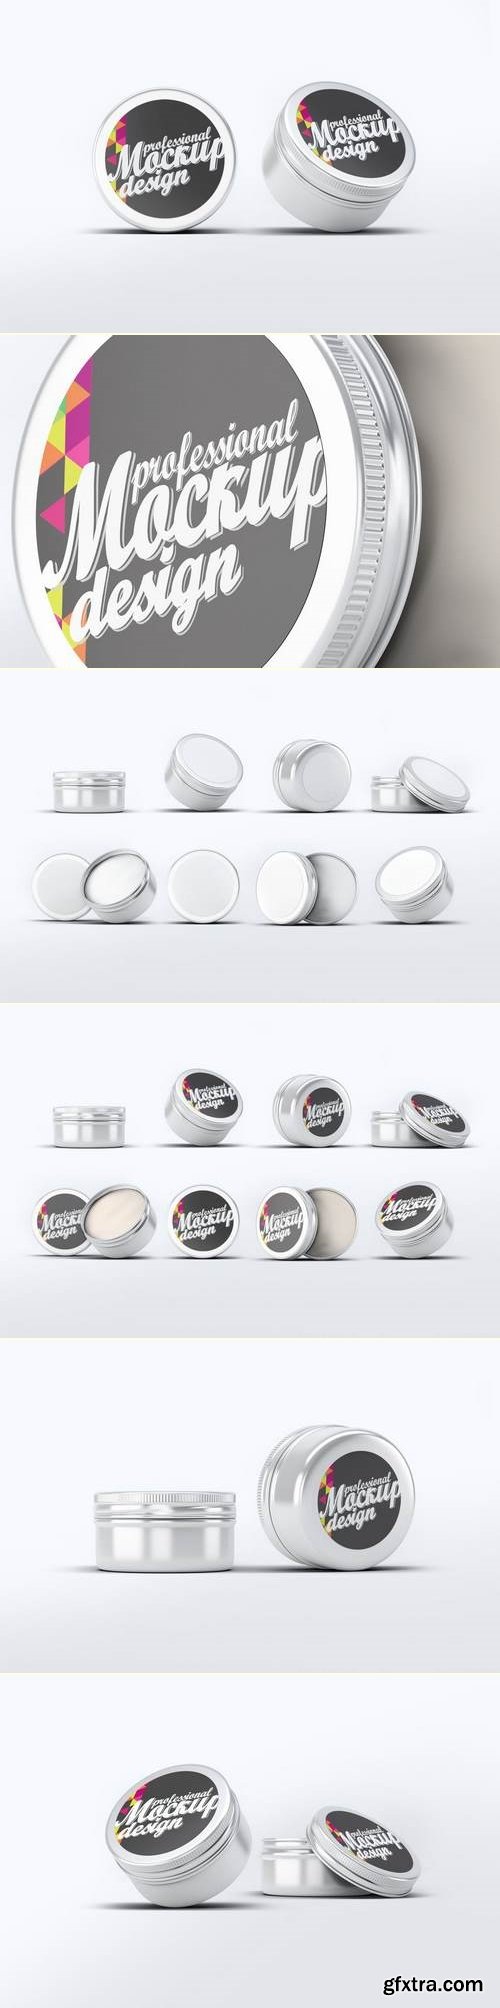 Round Tin Can Mock-Up